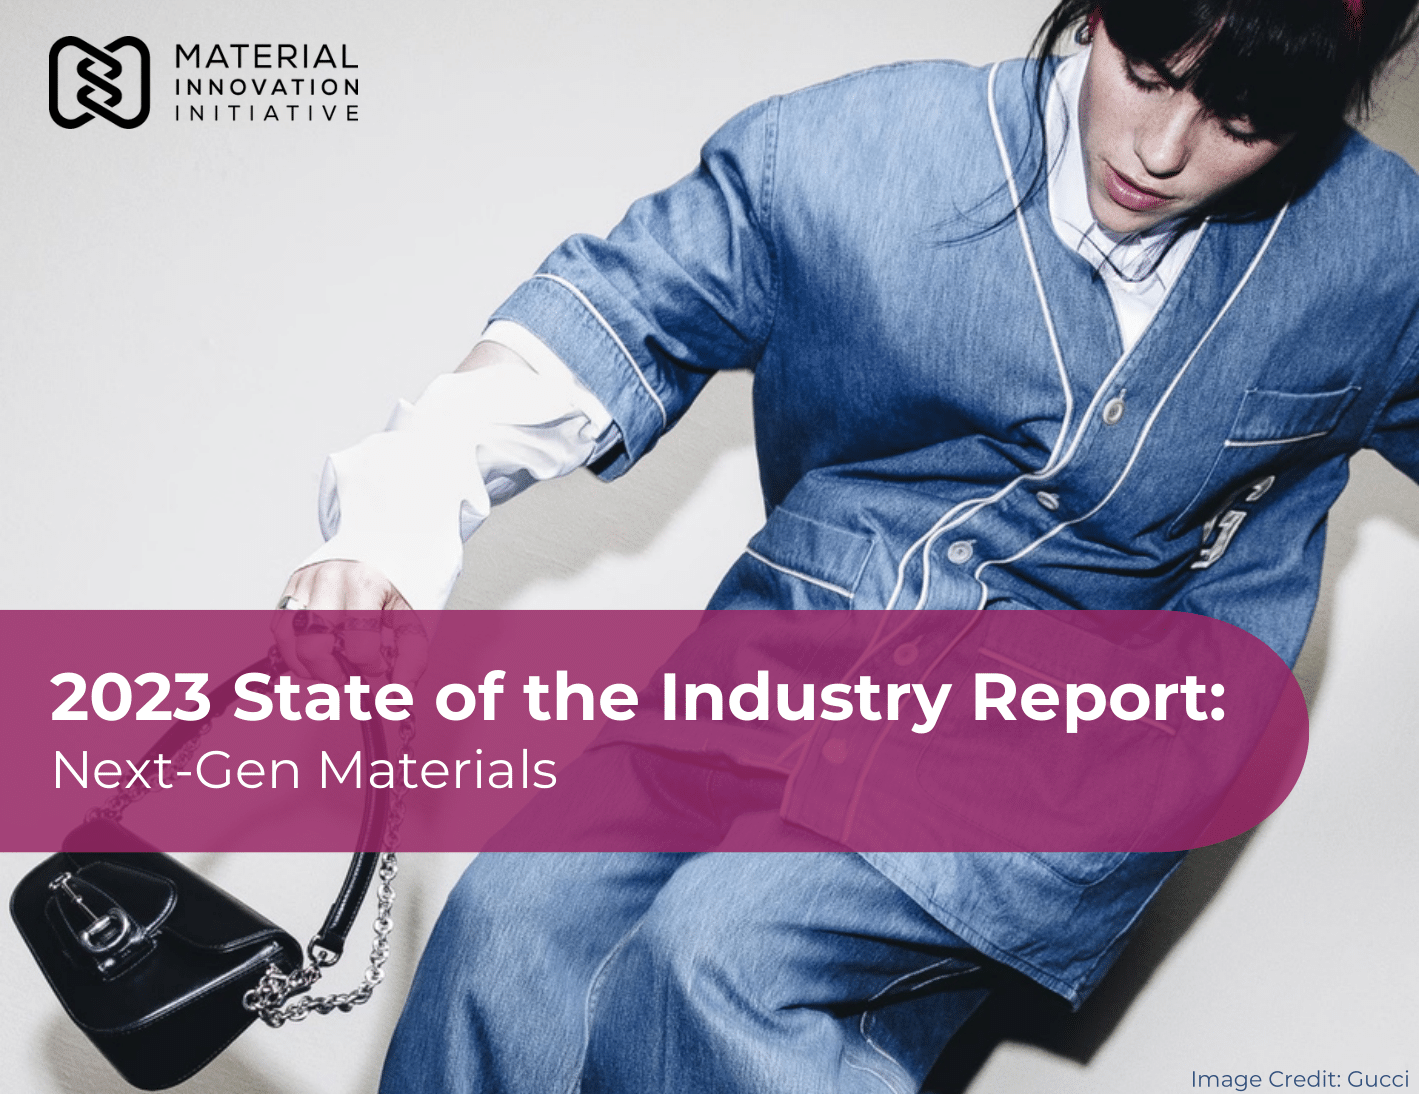 Hero Photo for 2023 State of the Industry Report